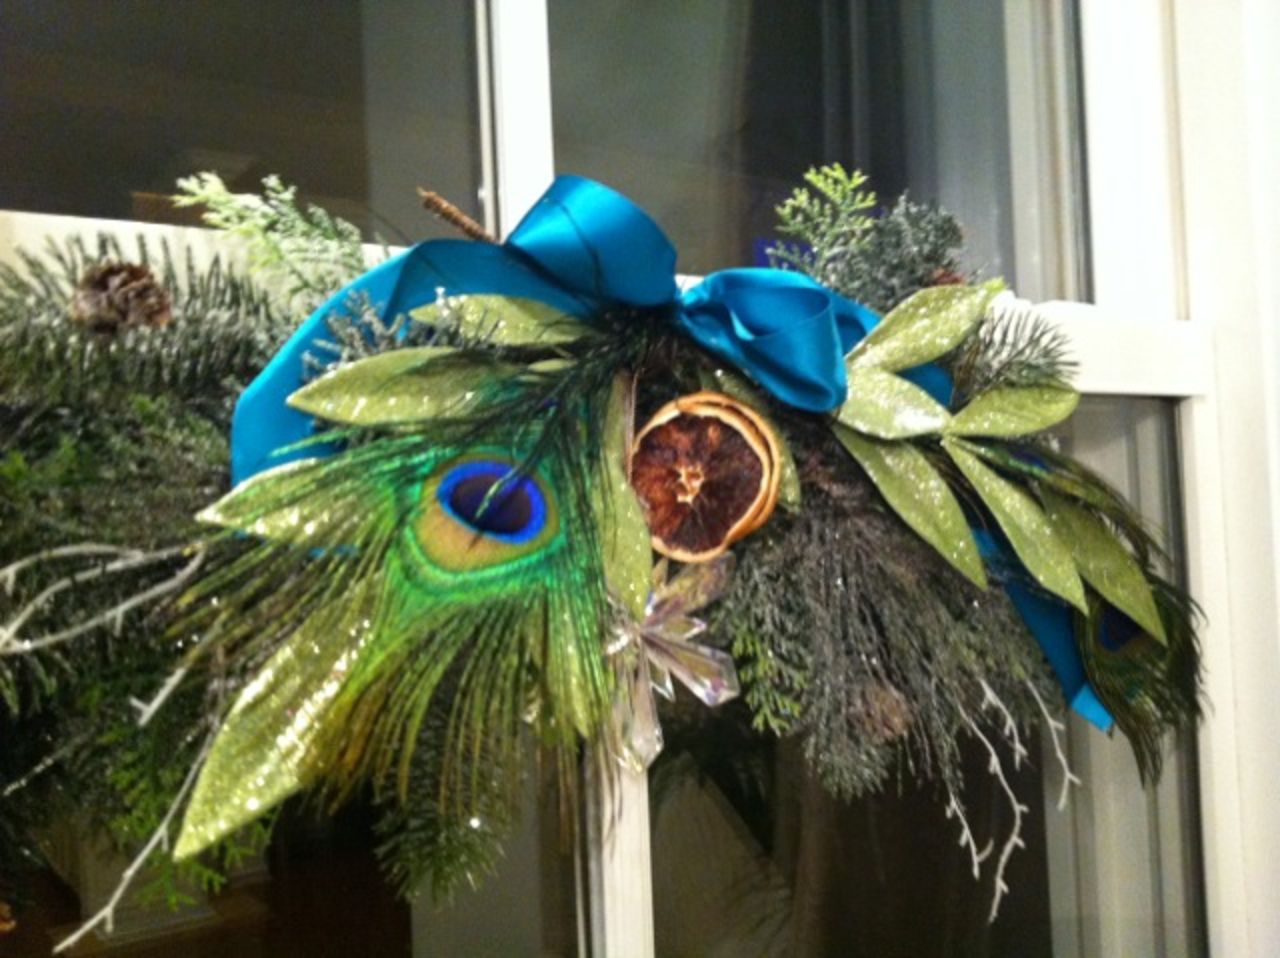 Peacock feathers and cut pine and cedar helped Norwood focus her holiday decor on blues and greens.